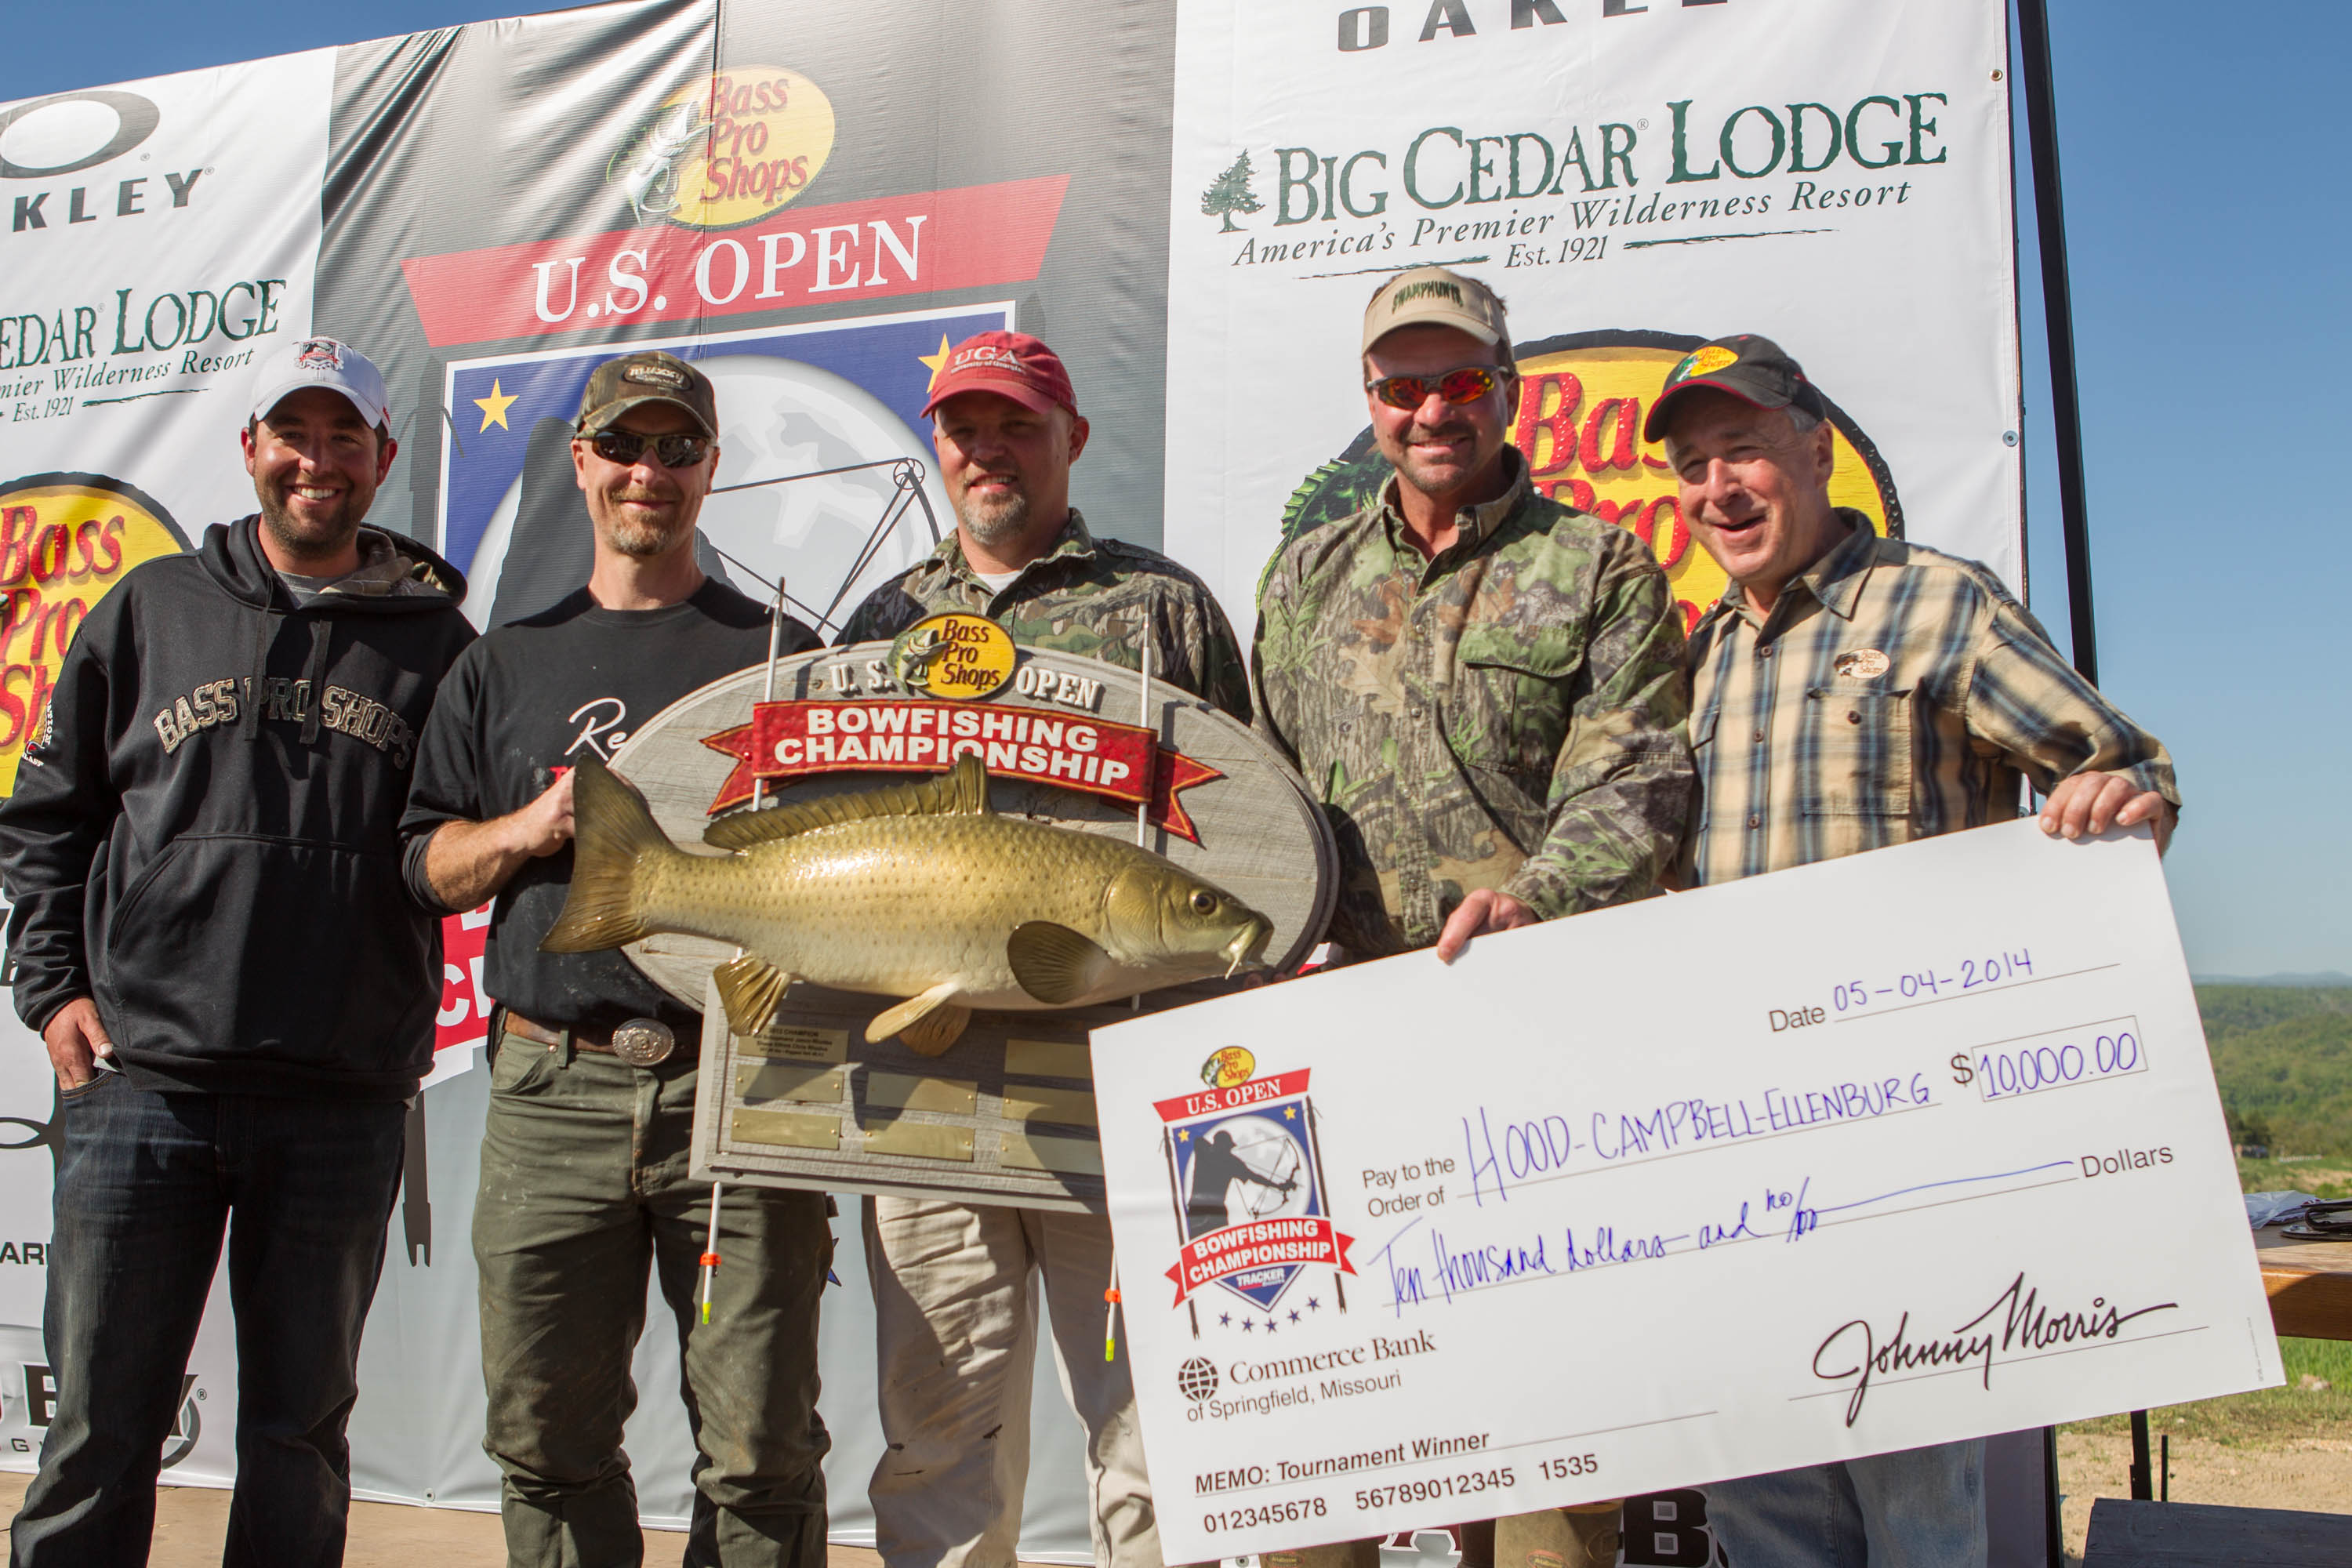 Team Wins 10,000 at Second Annual Bass Pro Shops U.S. Open